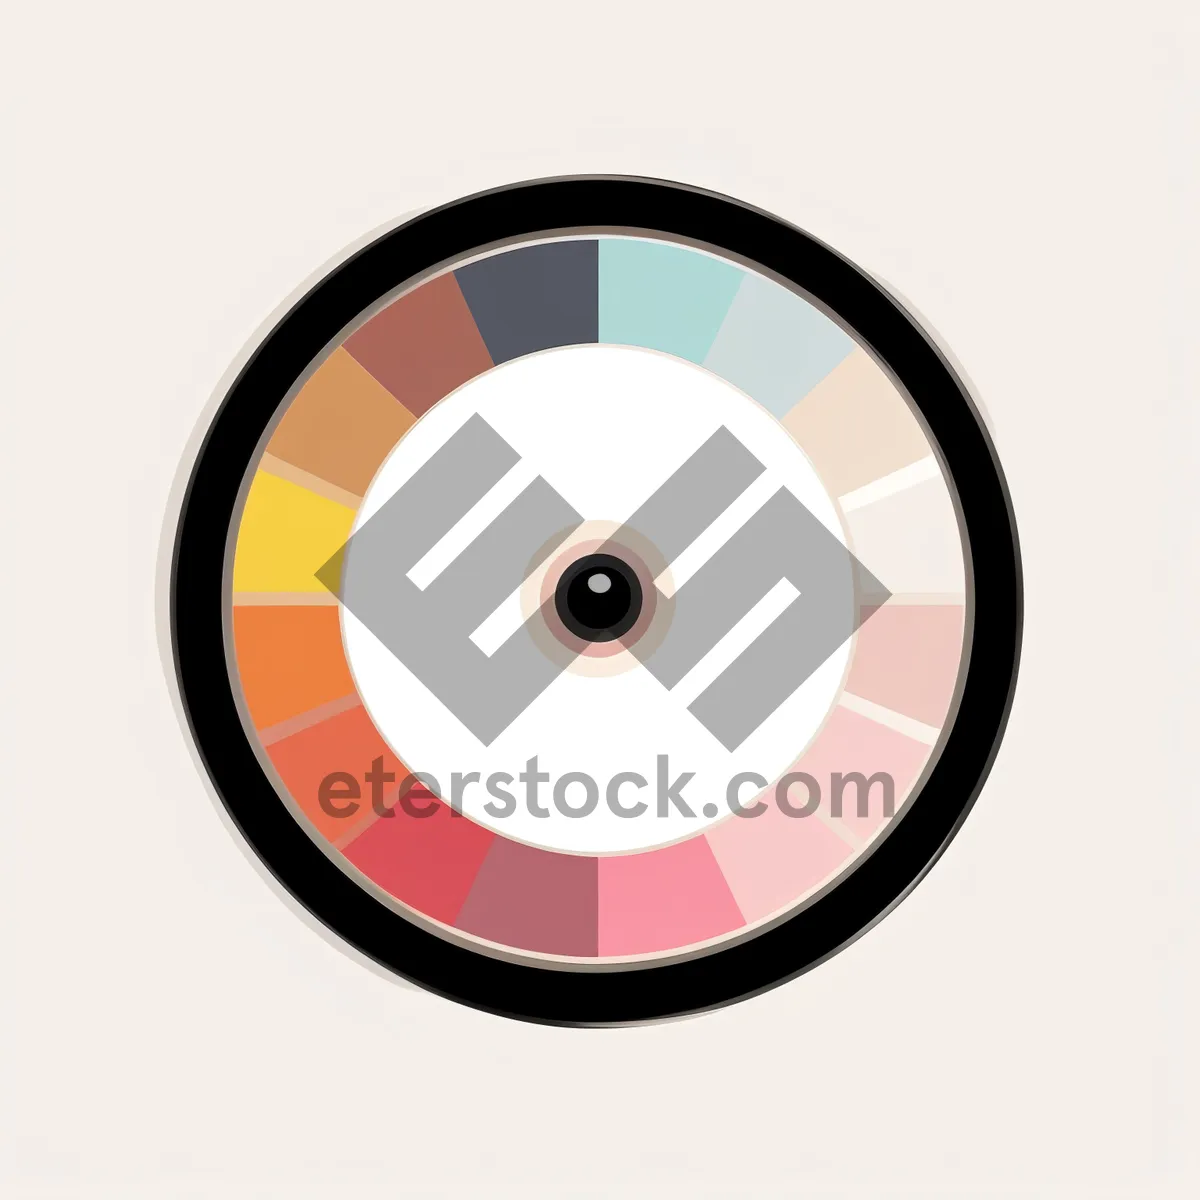 Picture of Shiny Disk Icon: 3D Circle Symbolizing Digital Storage